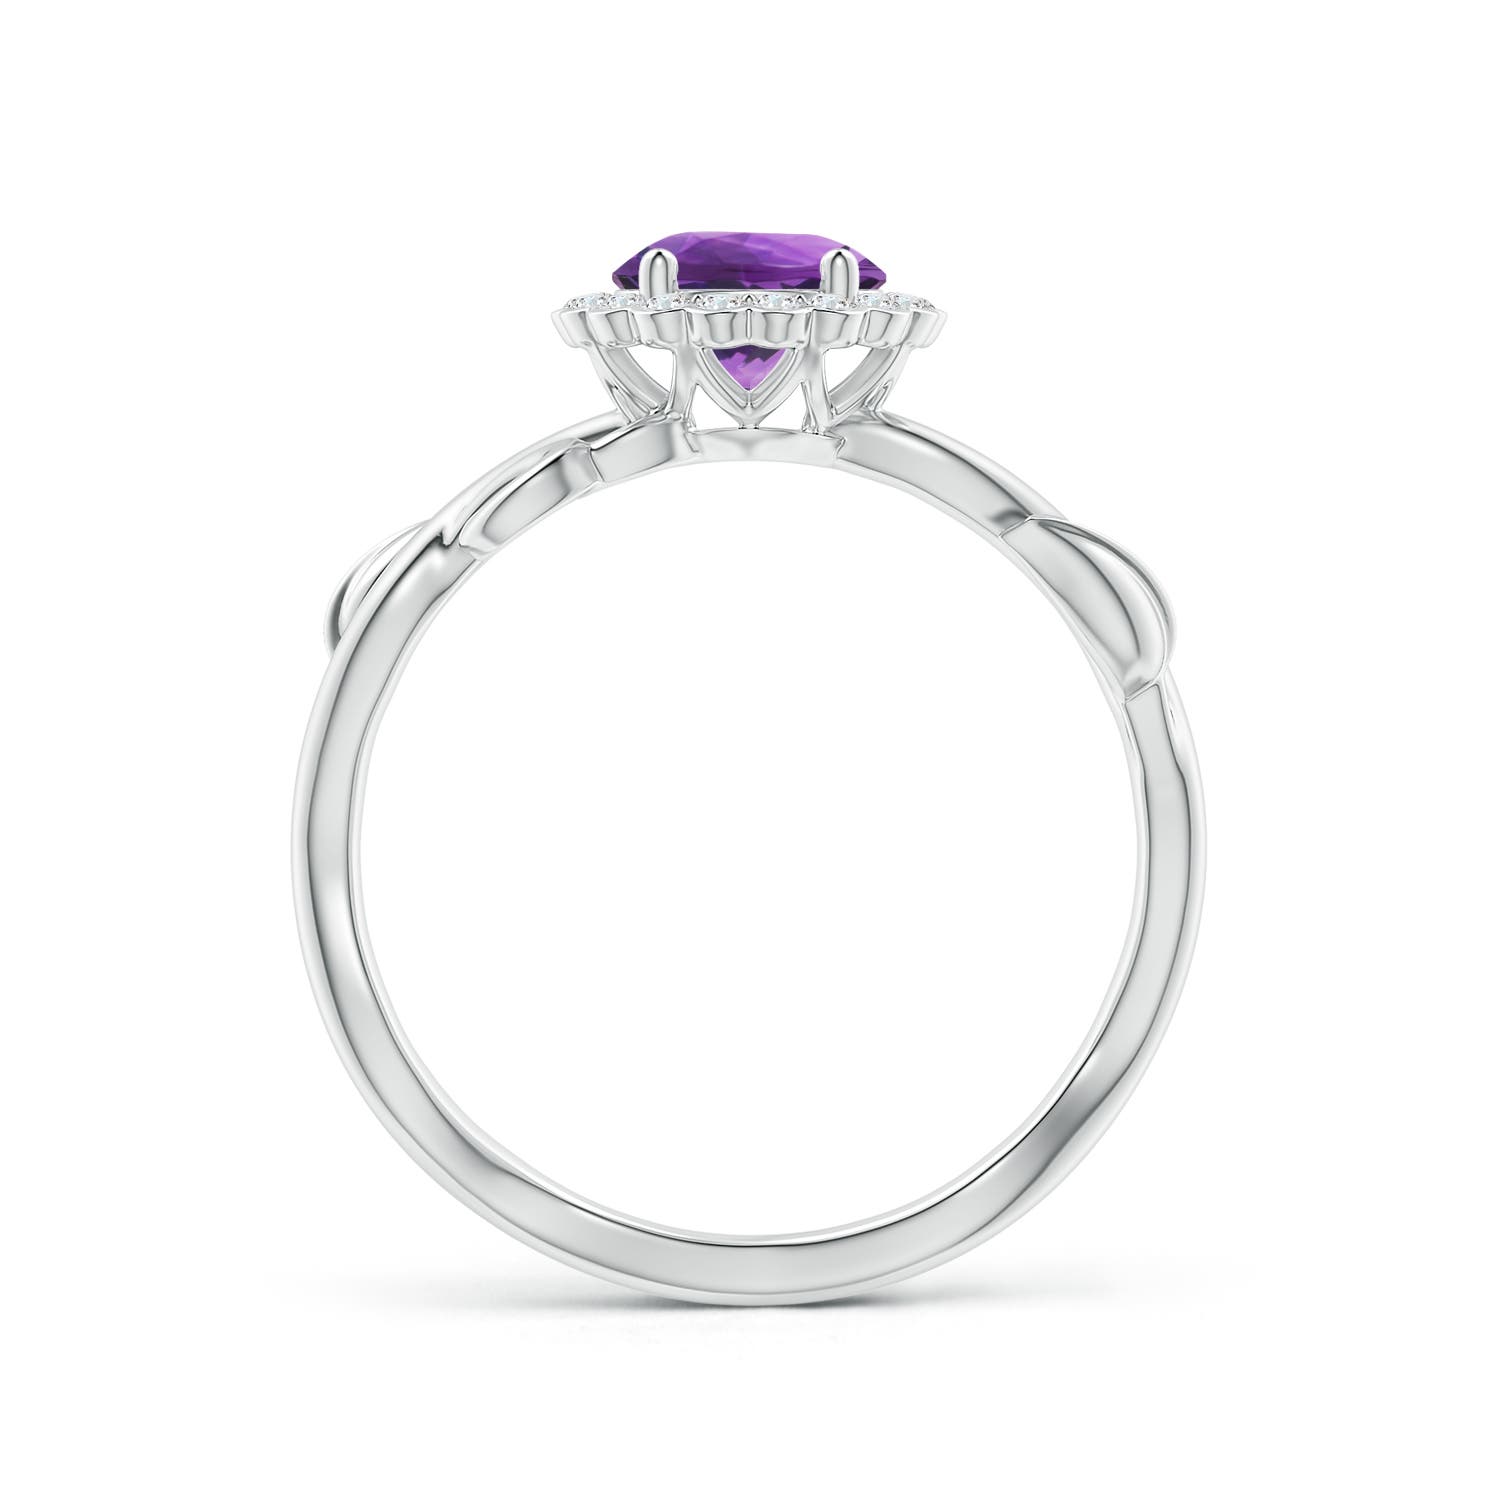 AAA - Amethyst / 0.91 CT / 14 KT White Gold